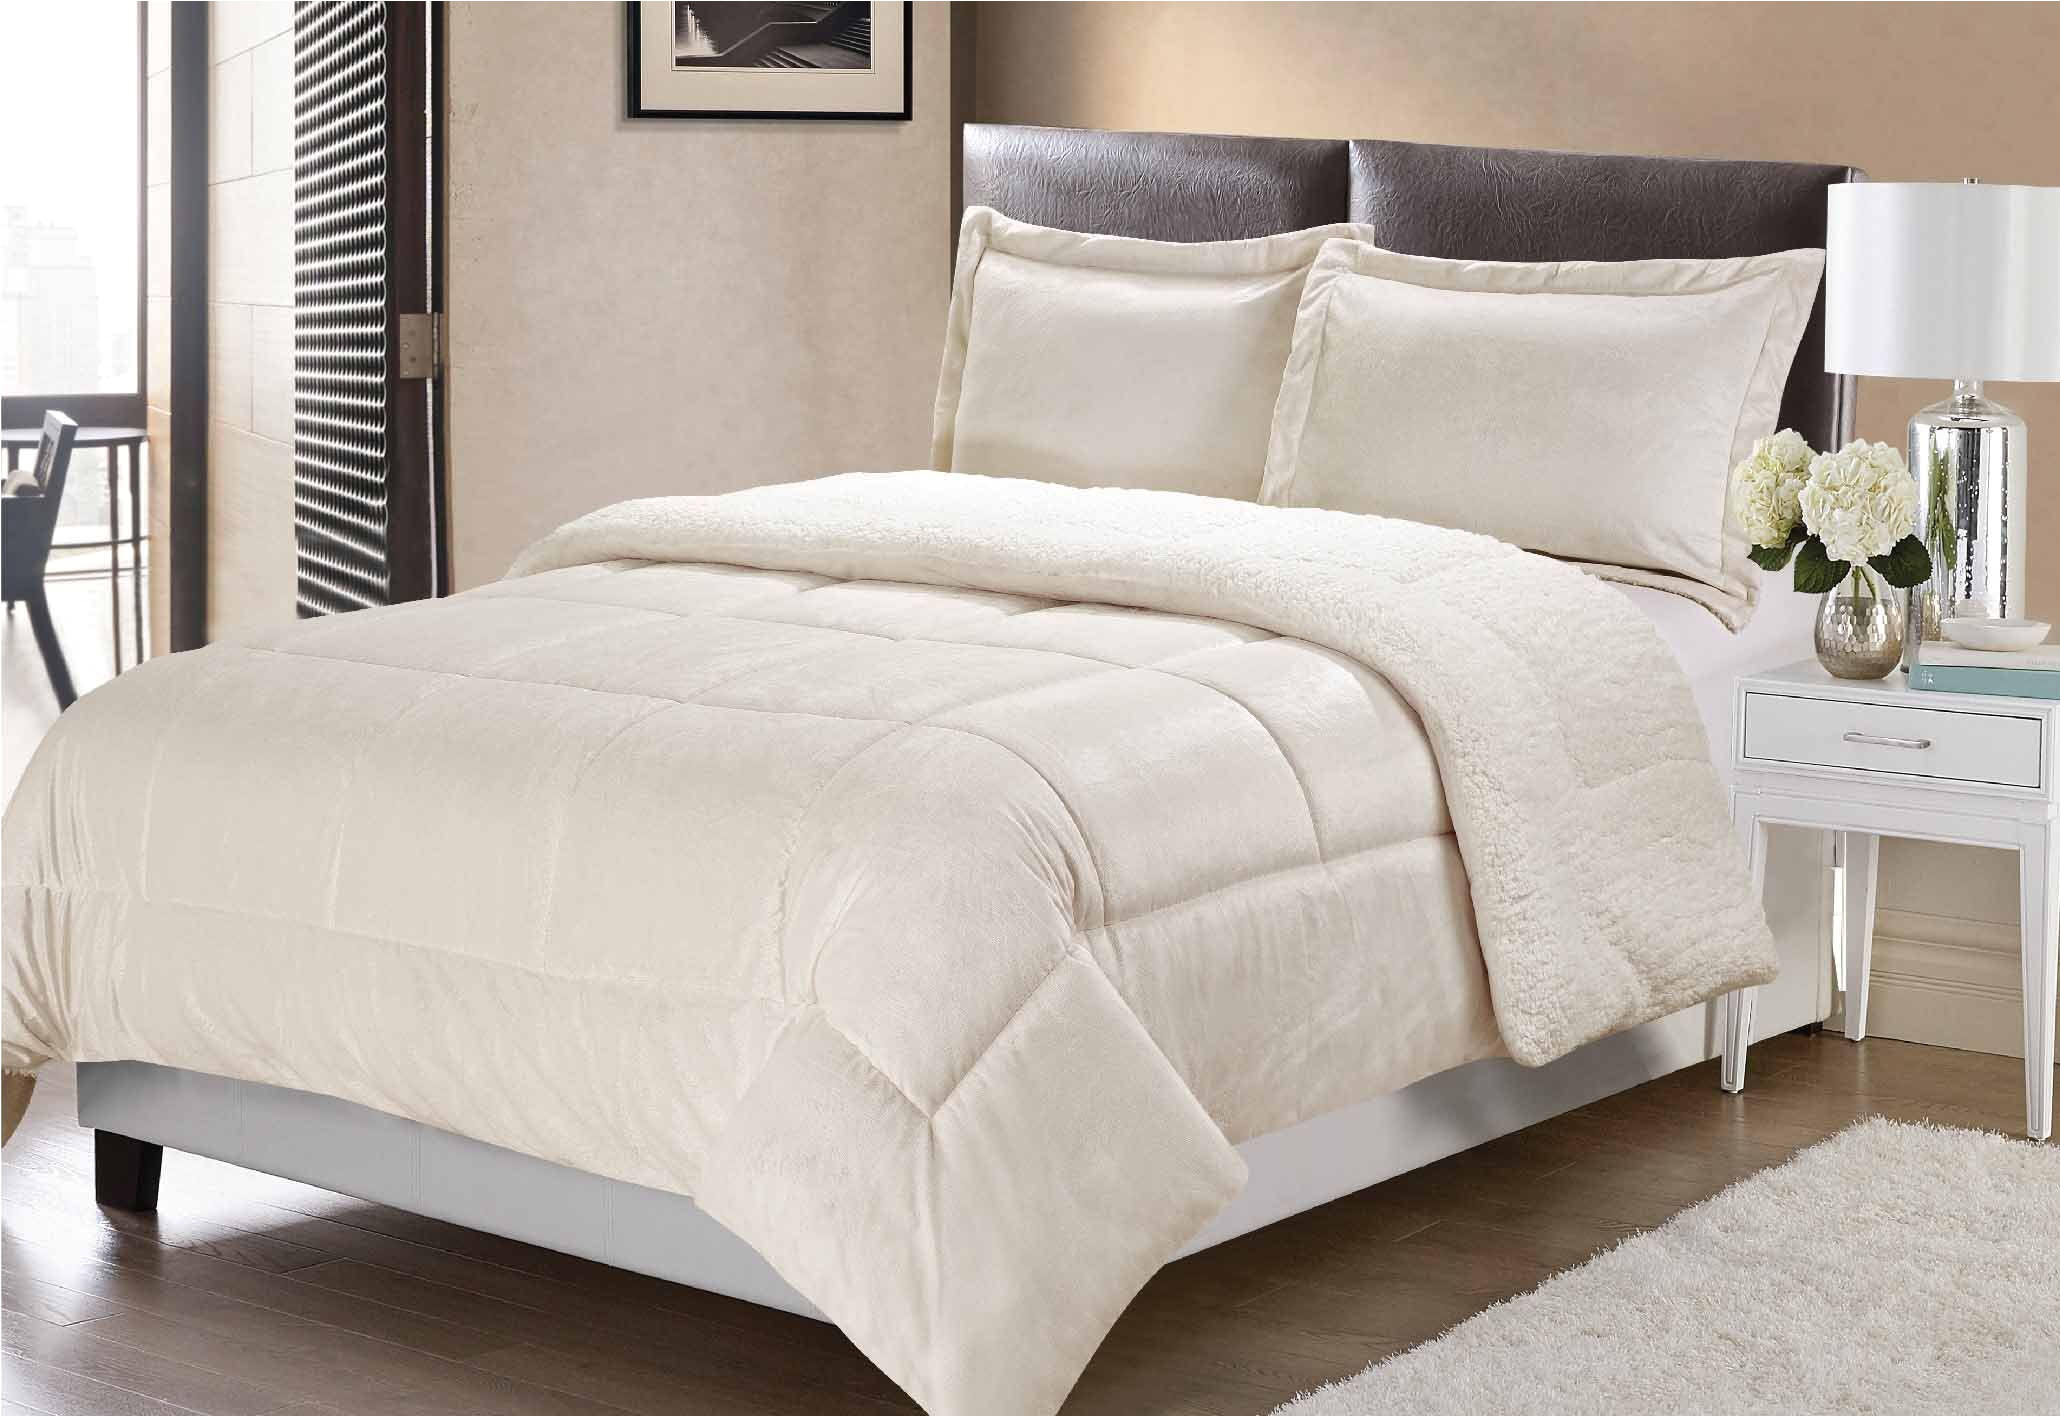 swift home collection ultra plush reversible micromink and sherpa 3 piece down alternative comforter with pillow shams luxury bedding set hypoallergenic